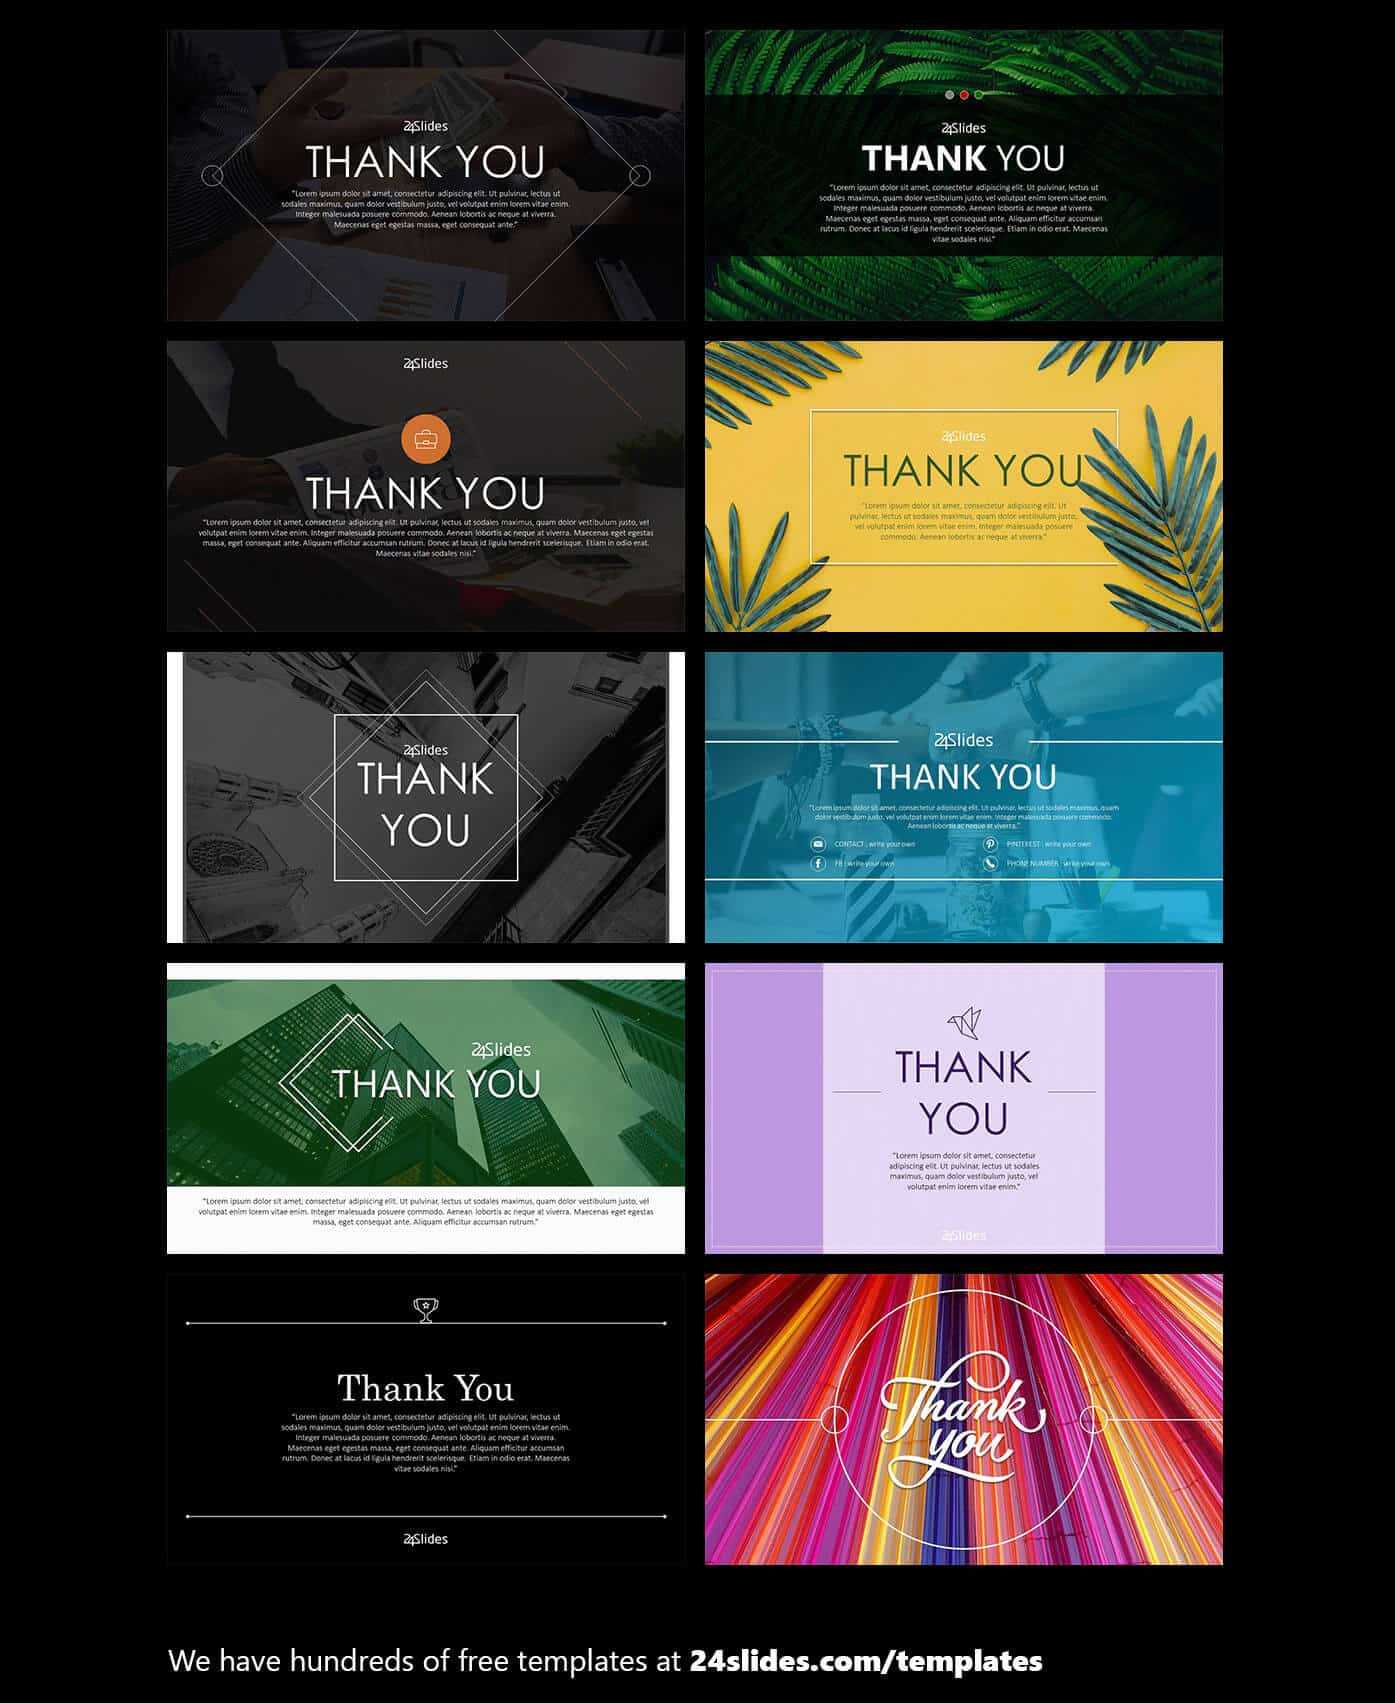 15 Fun And Colorful Free Powerpoint Templates | Present Better Within Powerpoint Sample Templates Free Download